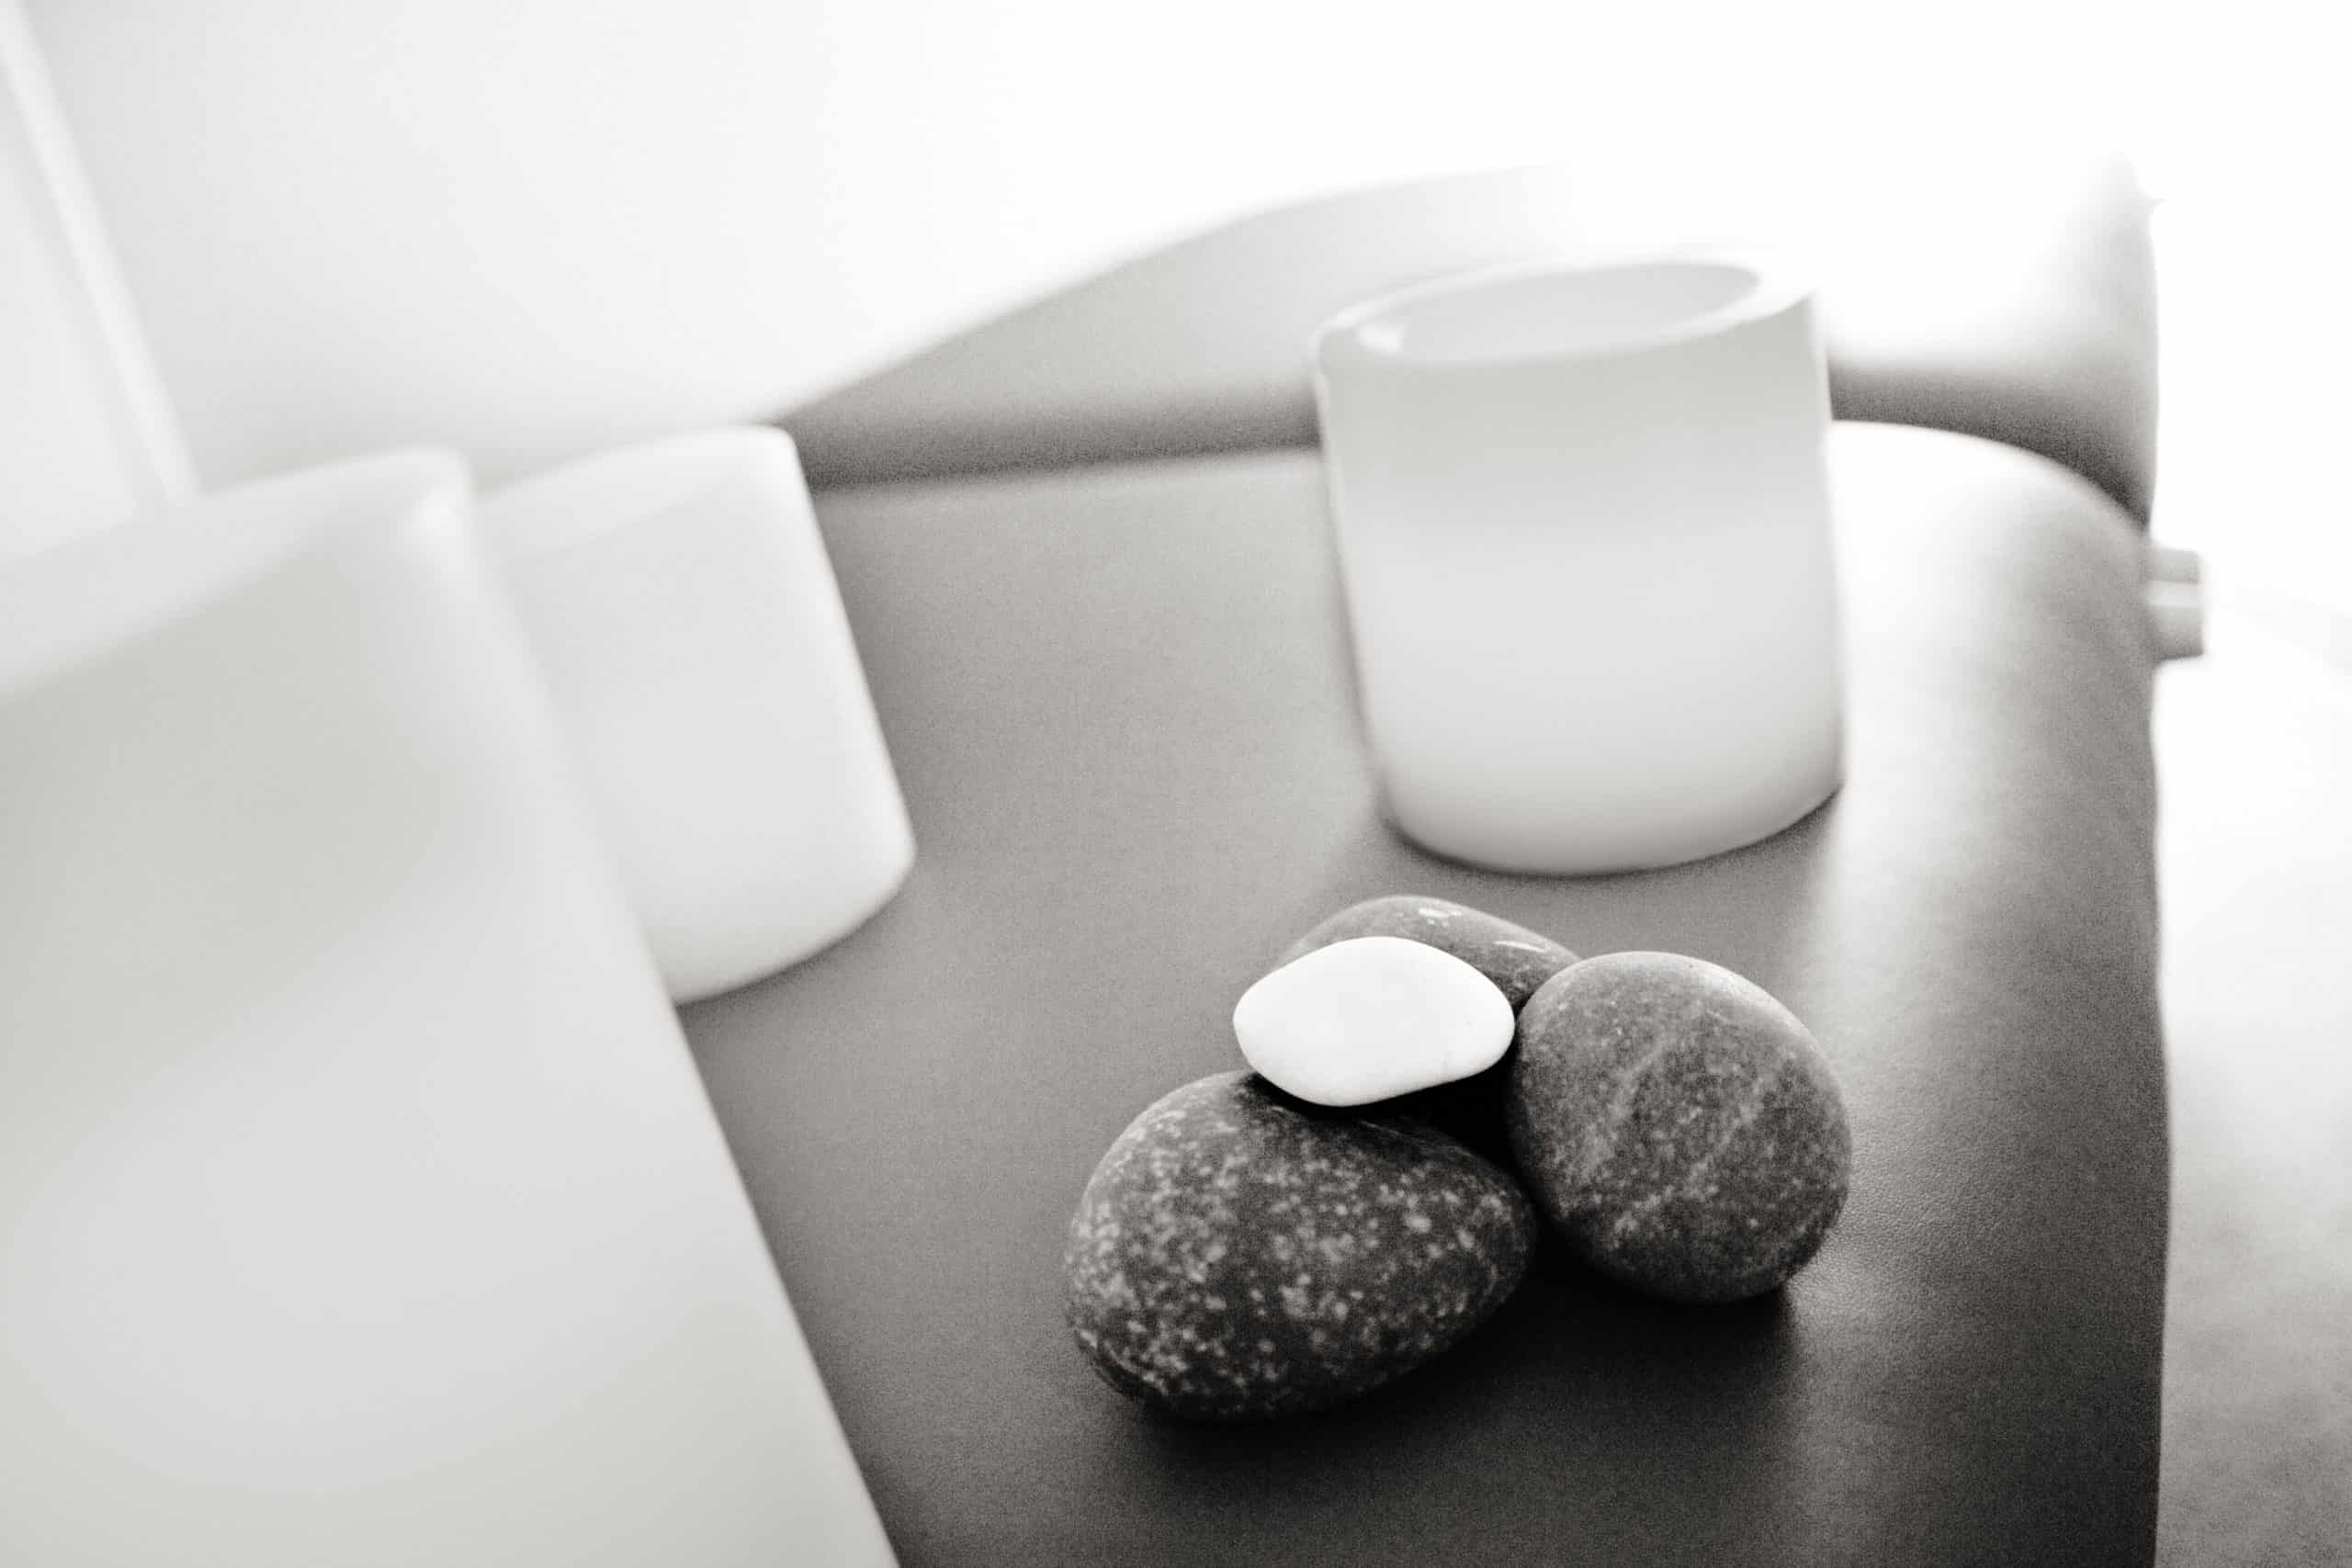 Therapy cups and stones used for therapy.